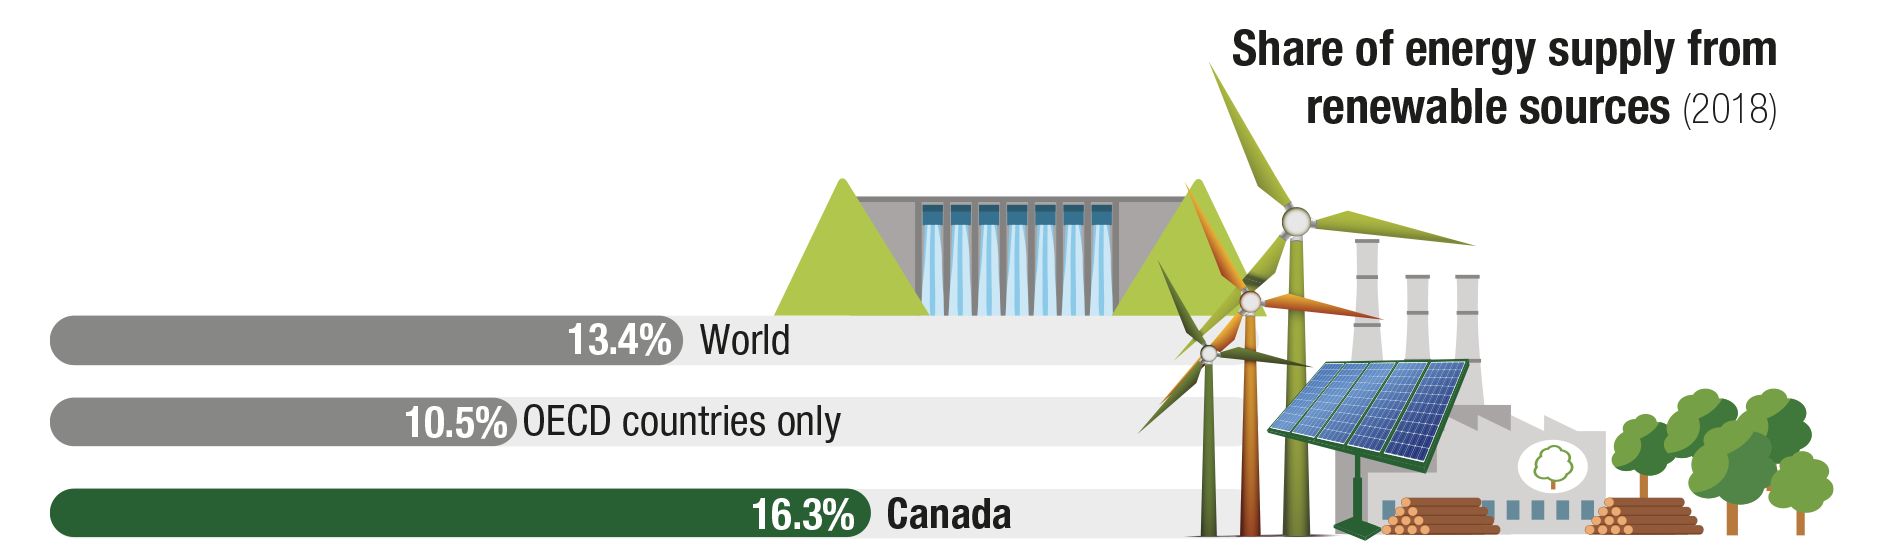 share-of-energy-supply-from-renewable-sources-09-2020.png